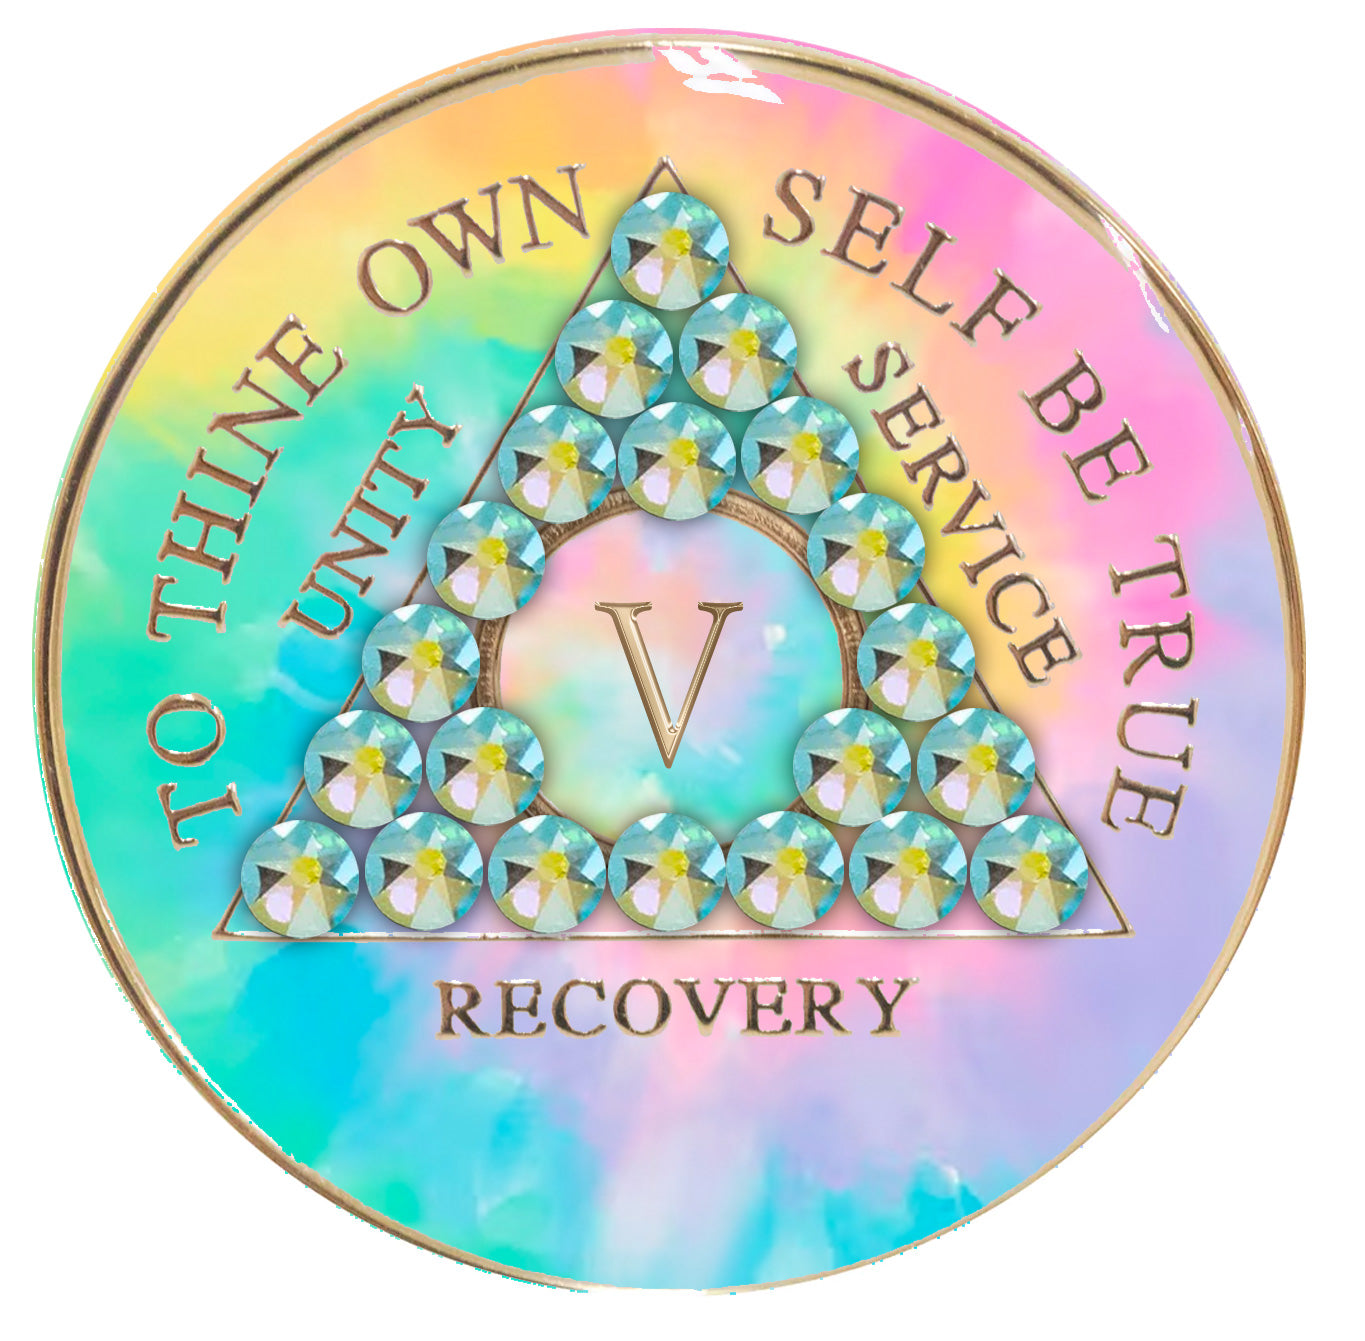 5 year AA medallion pastel tie-dye representing a psychic change that is needed in the recovery journey, with twenty-one Peridot AB genuine crystals, pink, blue, yellow, and green, in the shape of the triangle, with the AA moto and roman numeral embossed in 14k gold-plated brass, the medallion is sealed with resin for a glossy, scratch free finish.